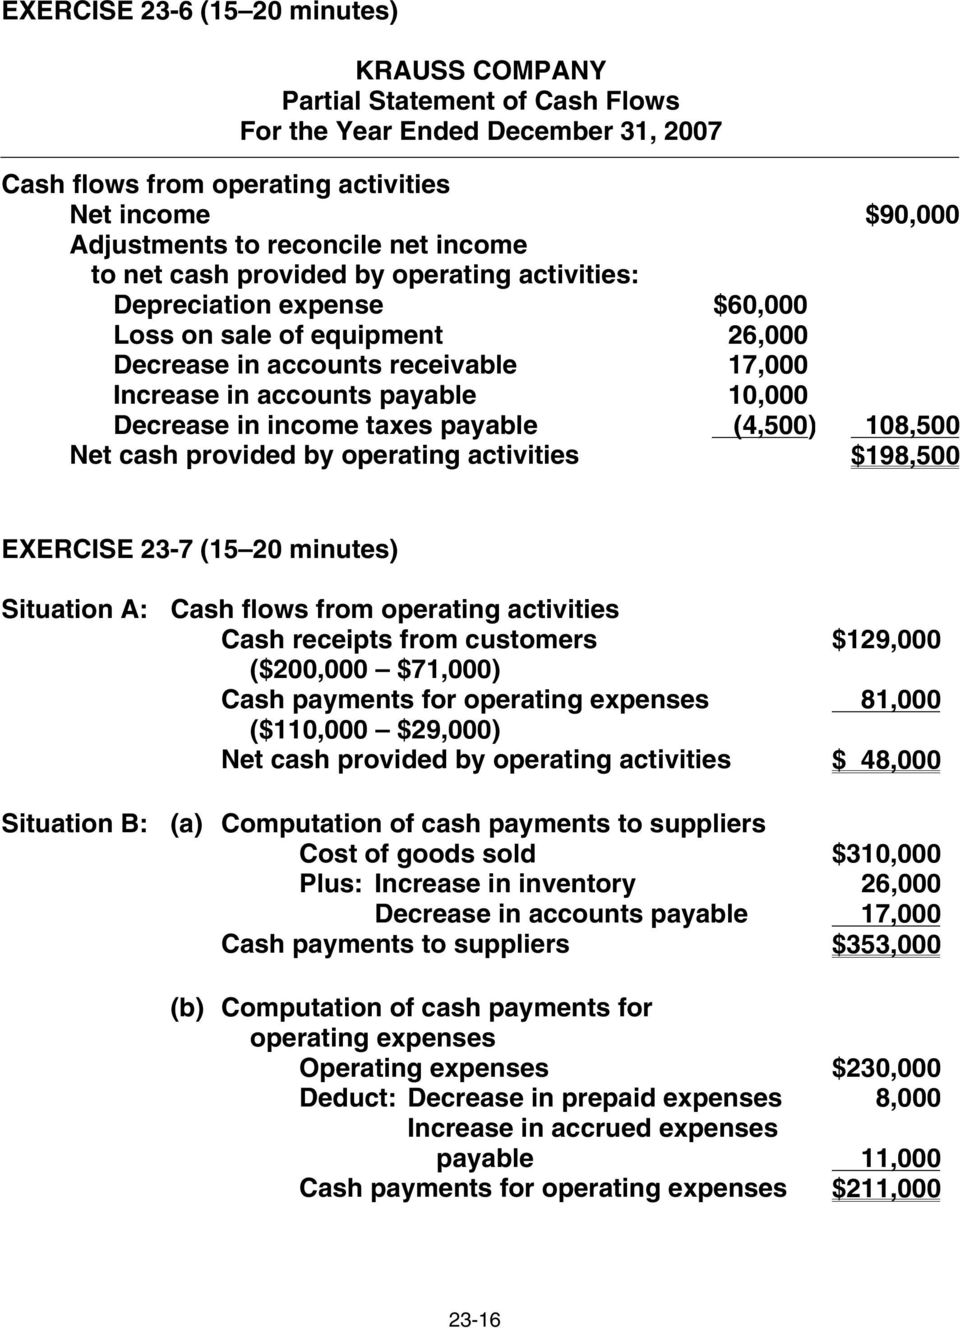 in income taxes payable (4,500) 108,500 Net cash provided by operating activities $198,500 EXERCISE 23-7 (15 20 minutes) Situation A: Situation B: Cash flows from operating activities Cash receipts